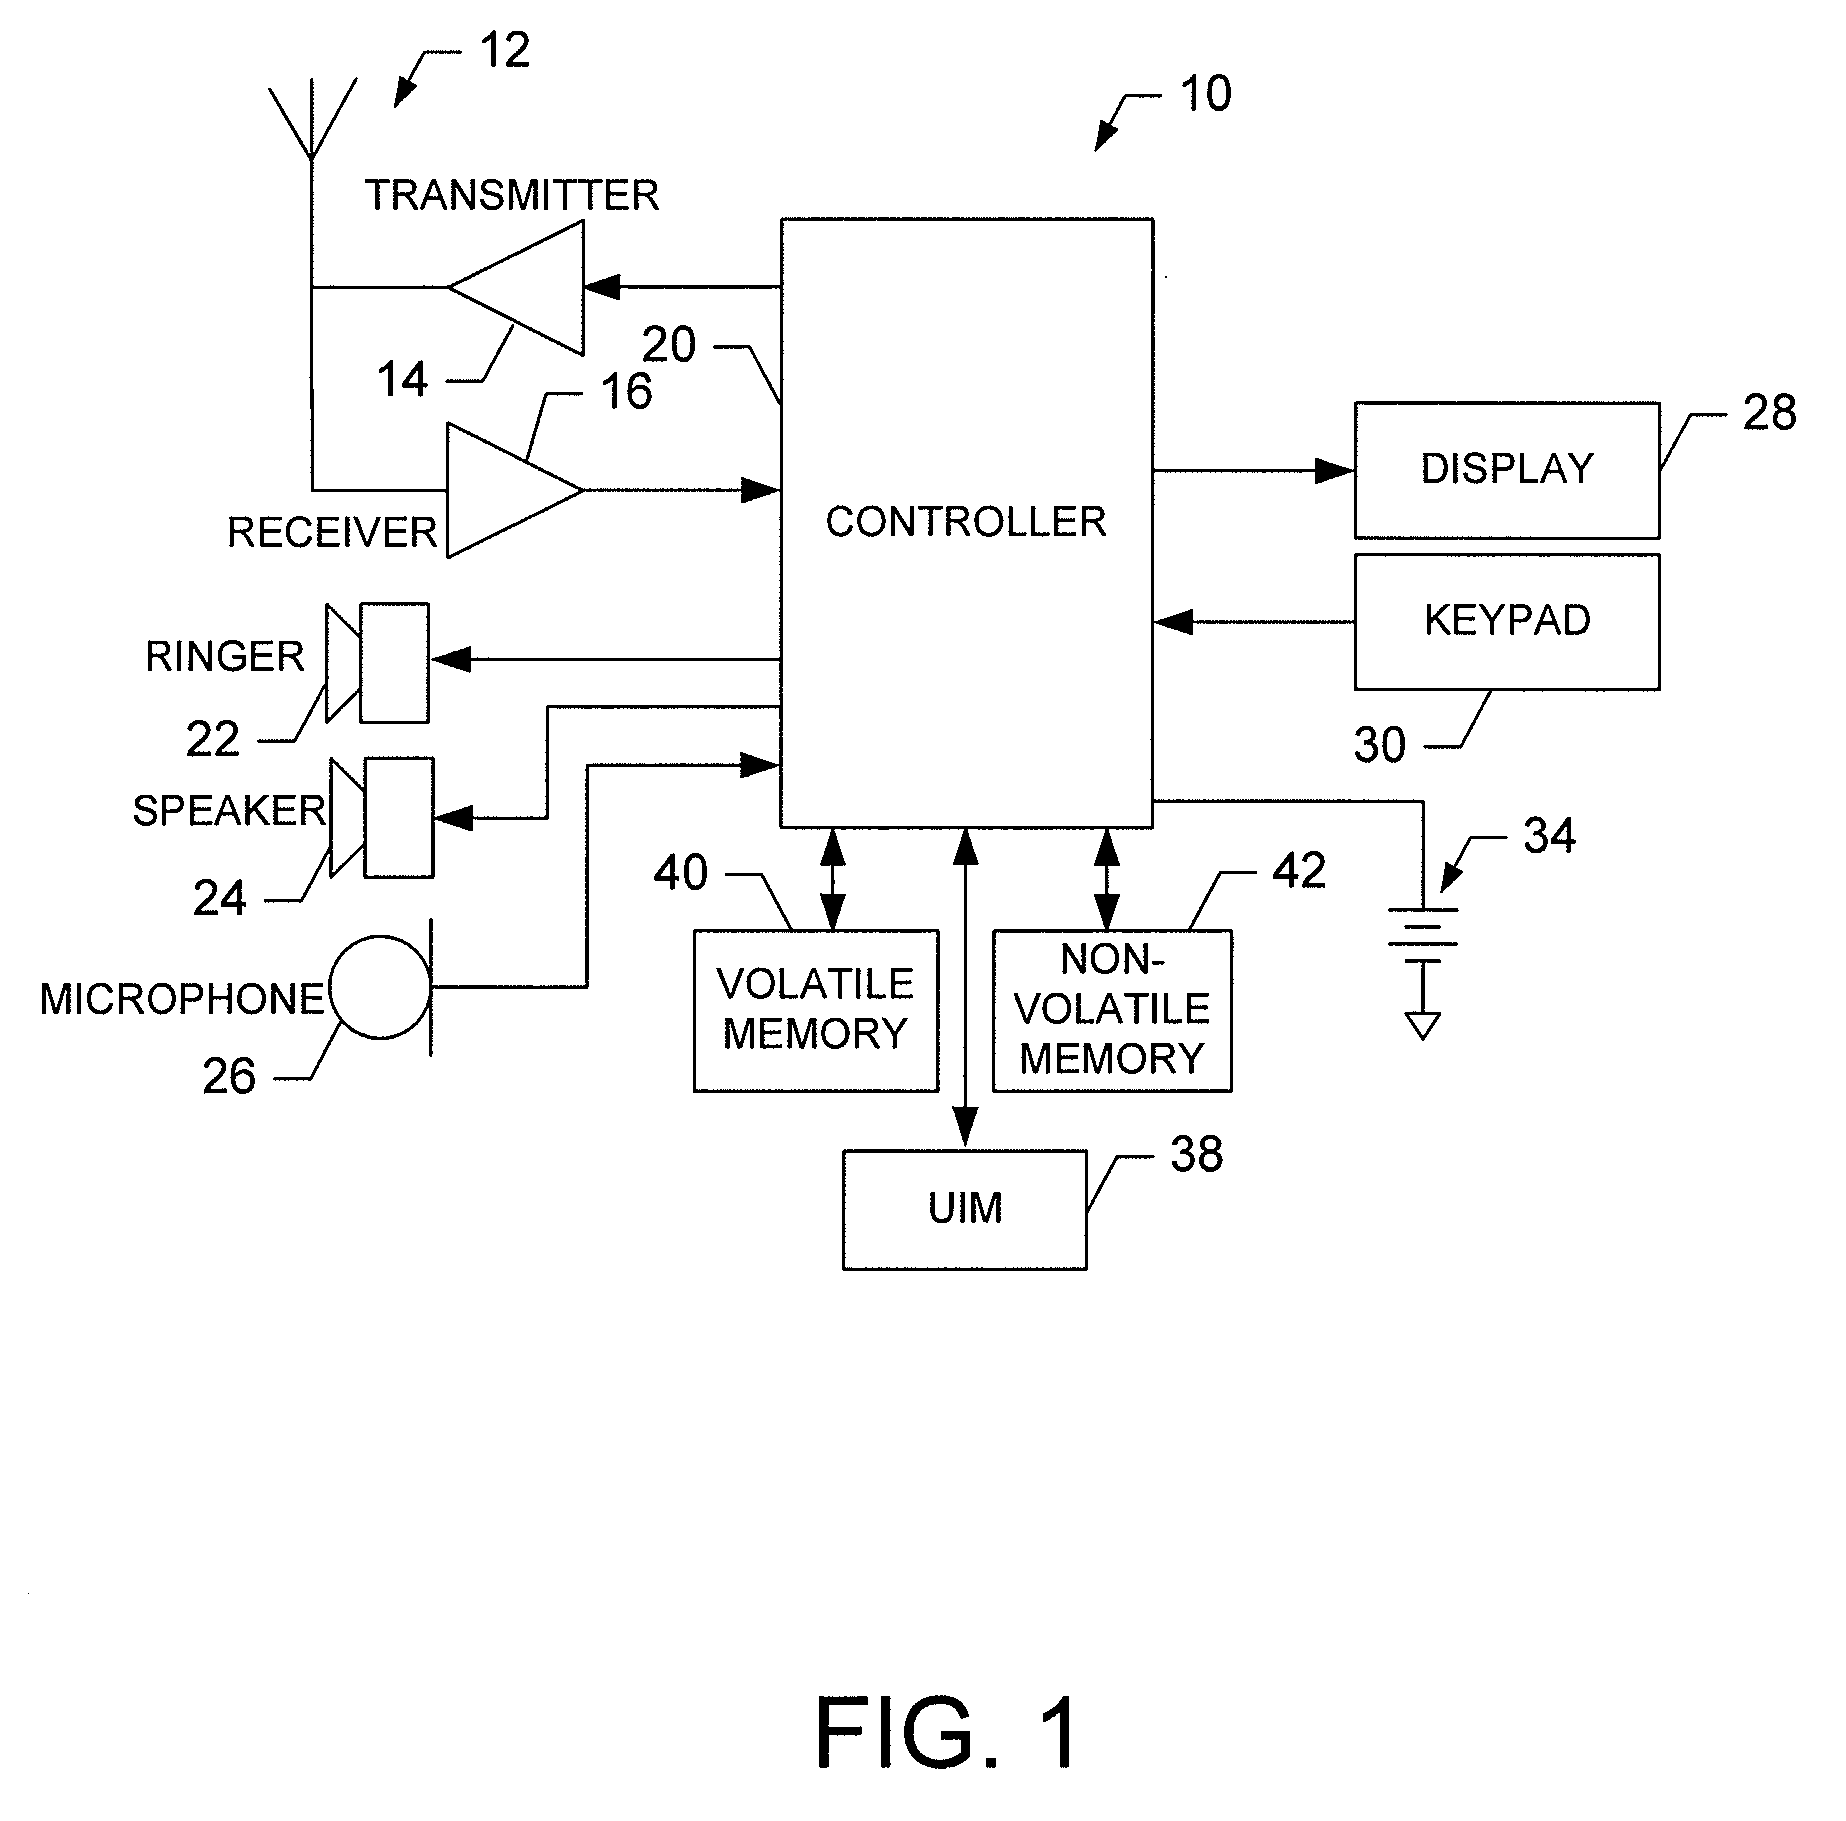 Apparatuses and methods for handling recorded voice strings